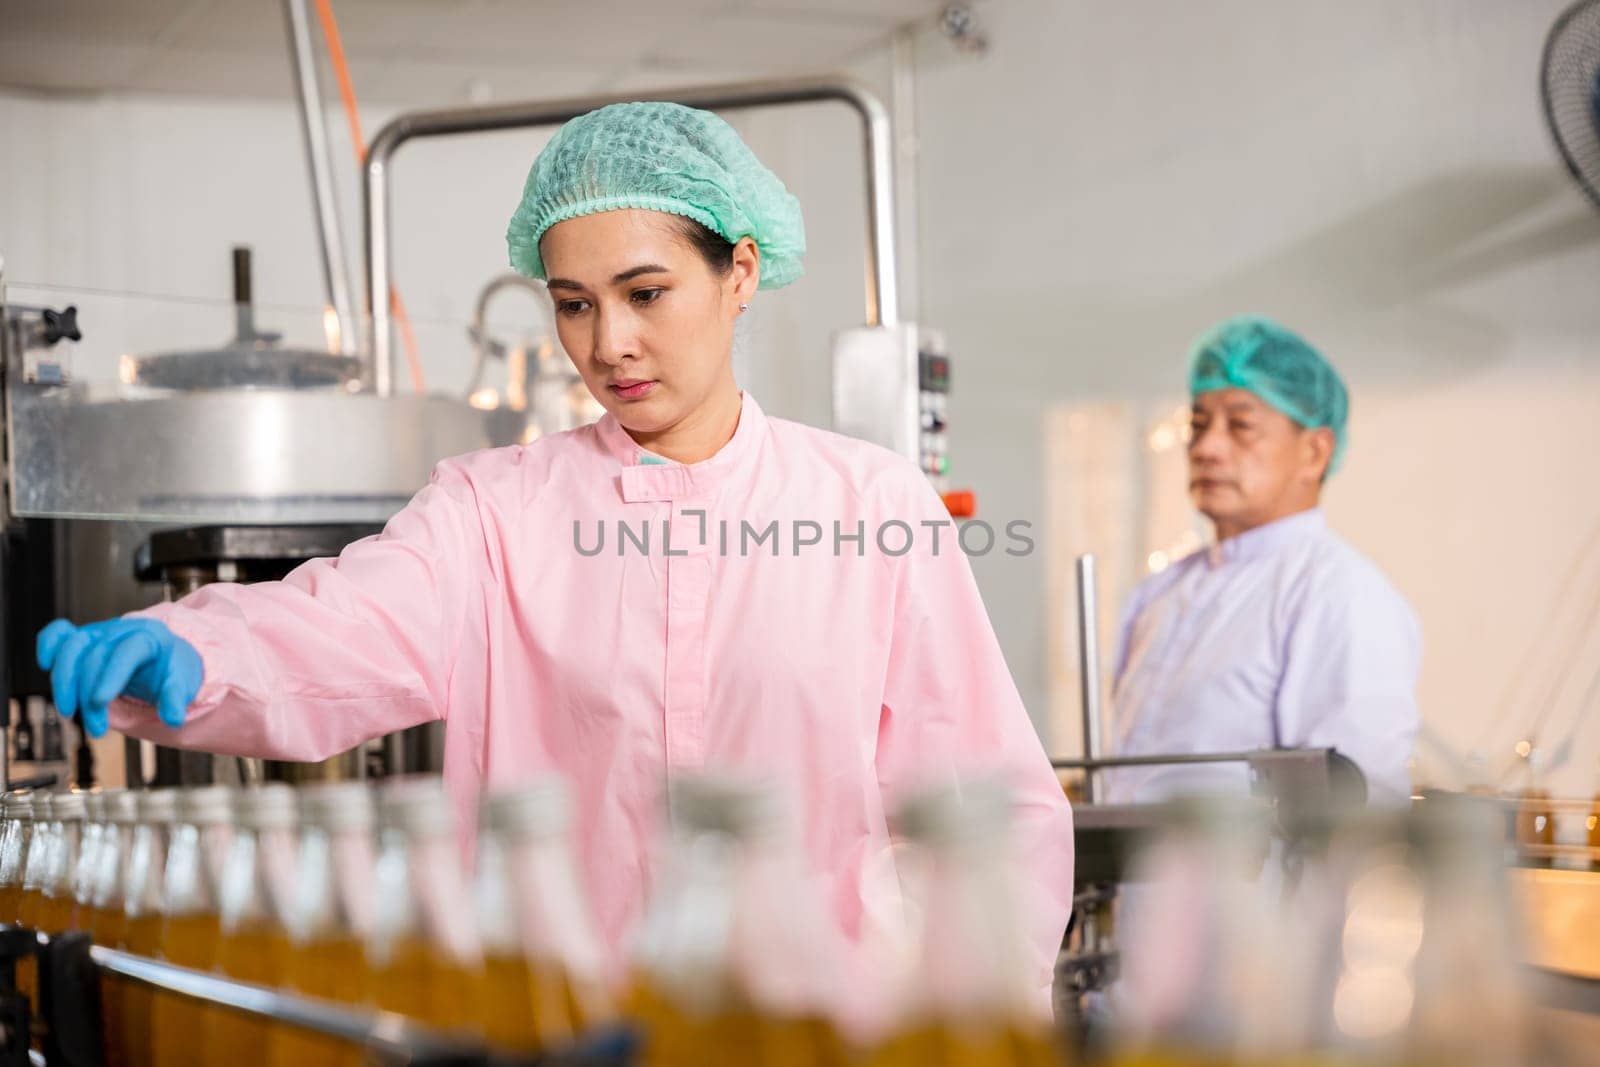 In a drink factory QC engineers examine glass bottles of fruit juice production. They wear protective gear ensuring top quality and hygiene in the manufacturing process.